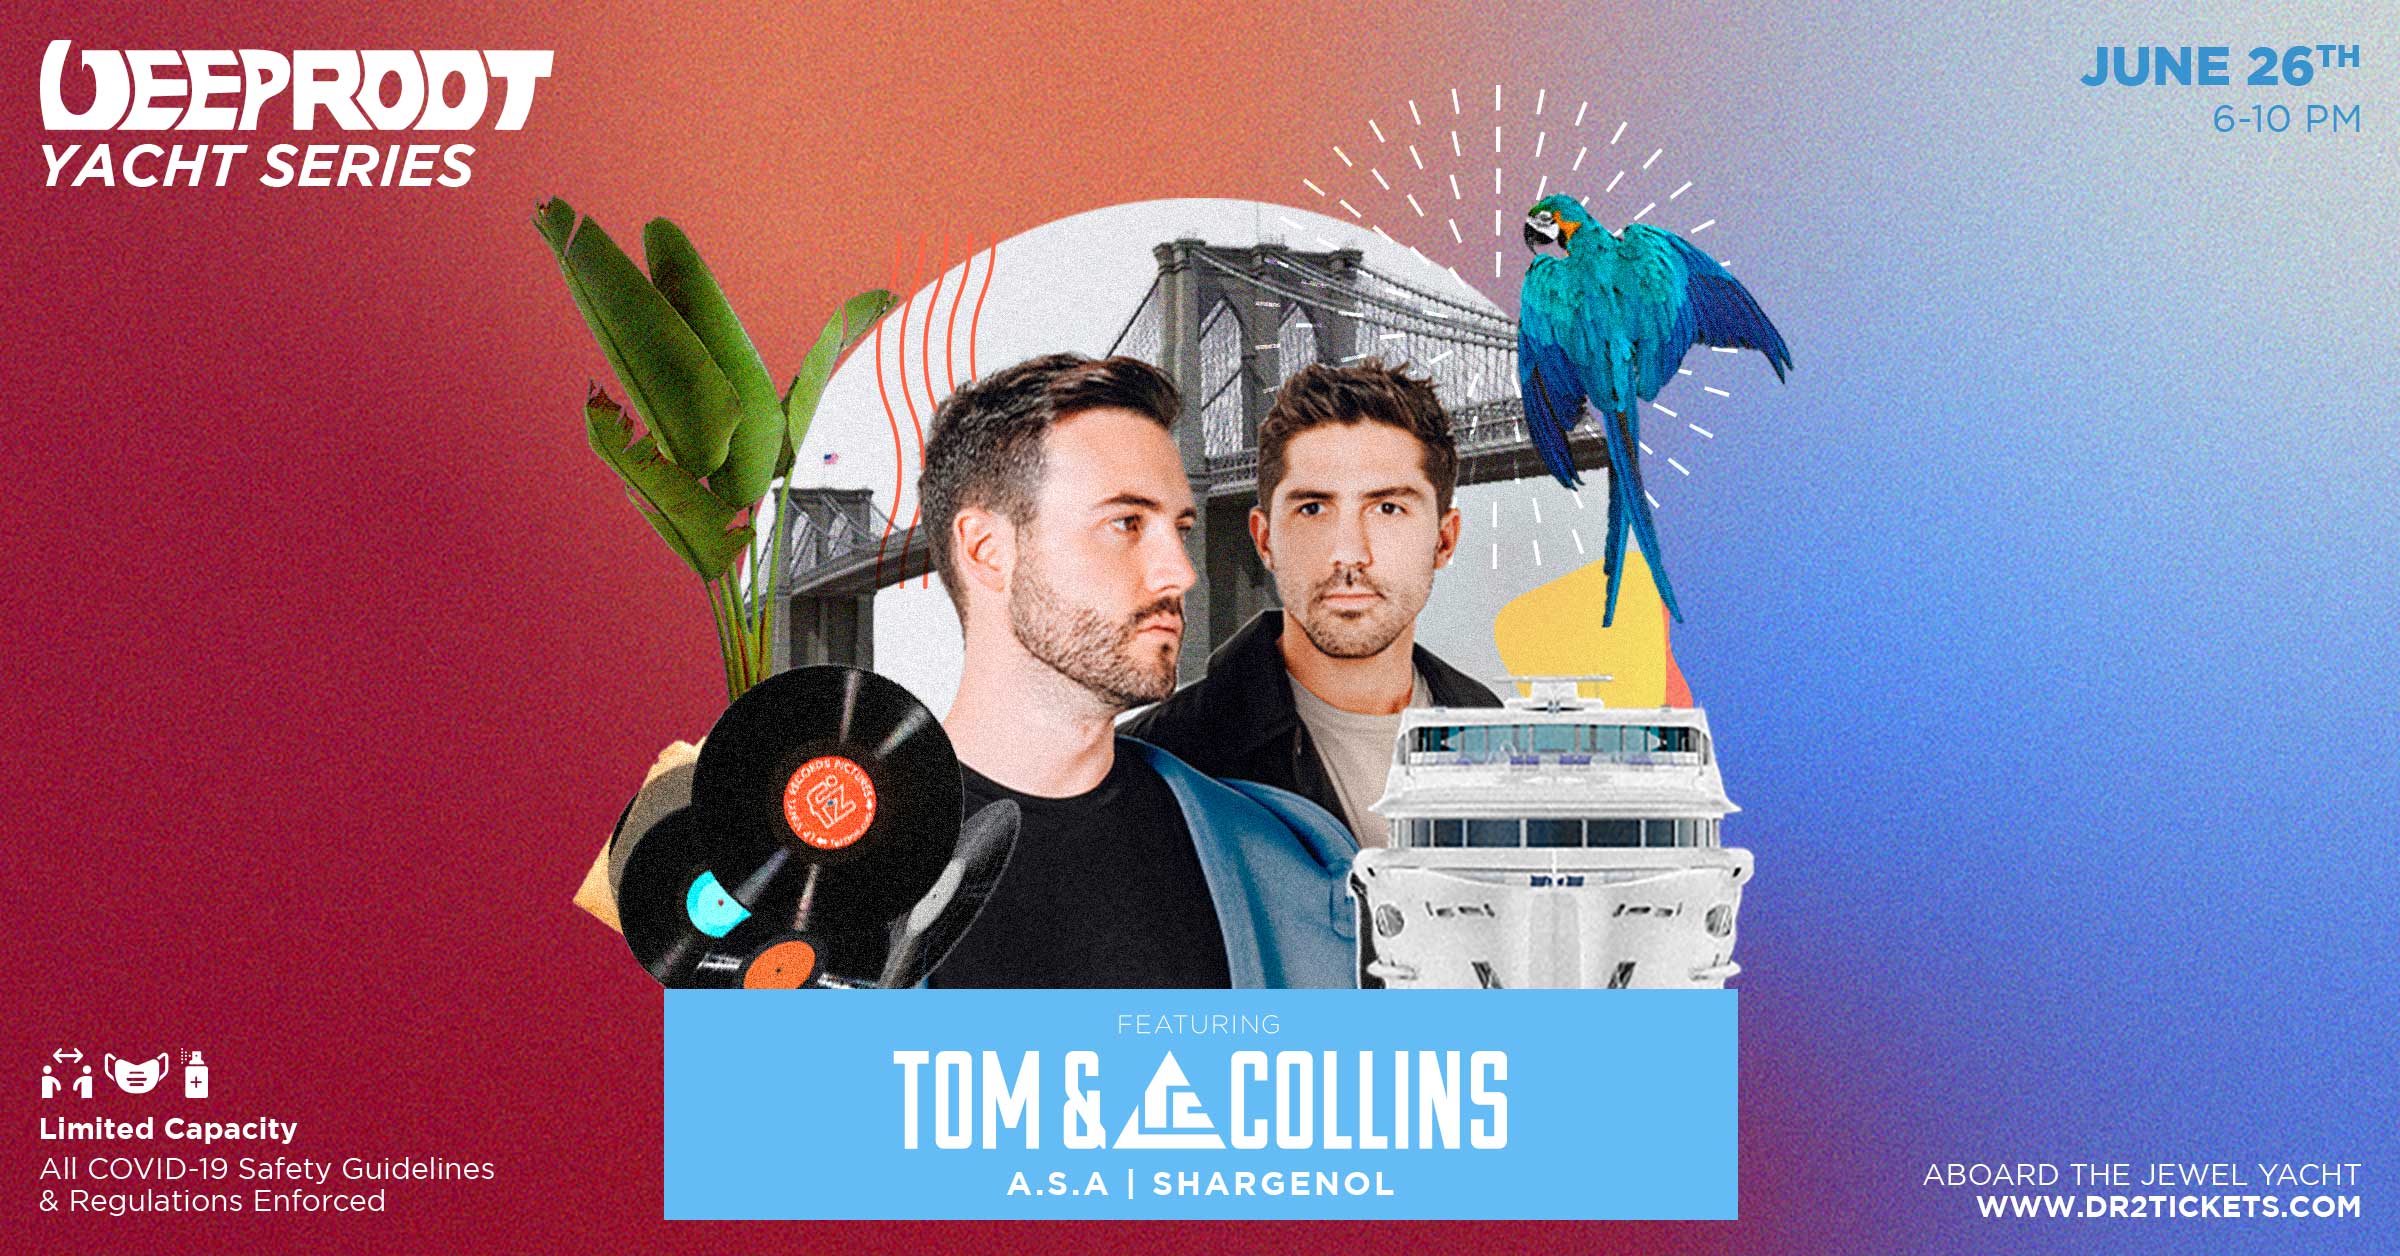 Deep Root Yacht Cruise ft Tom & Collins